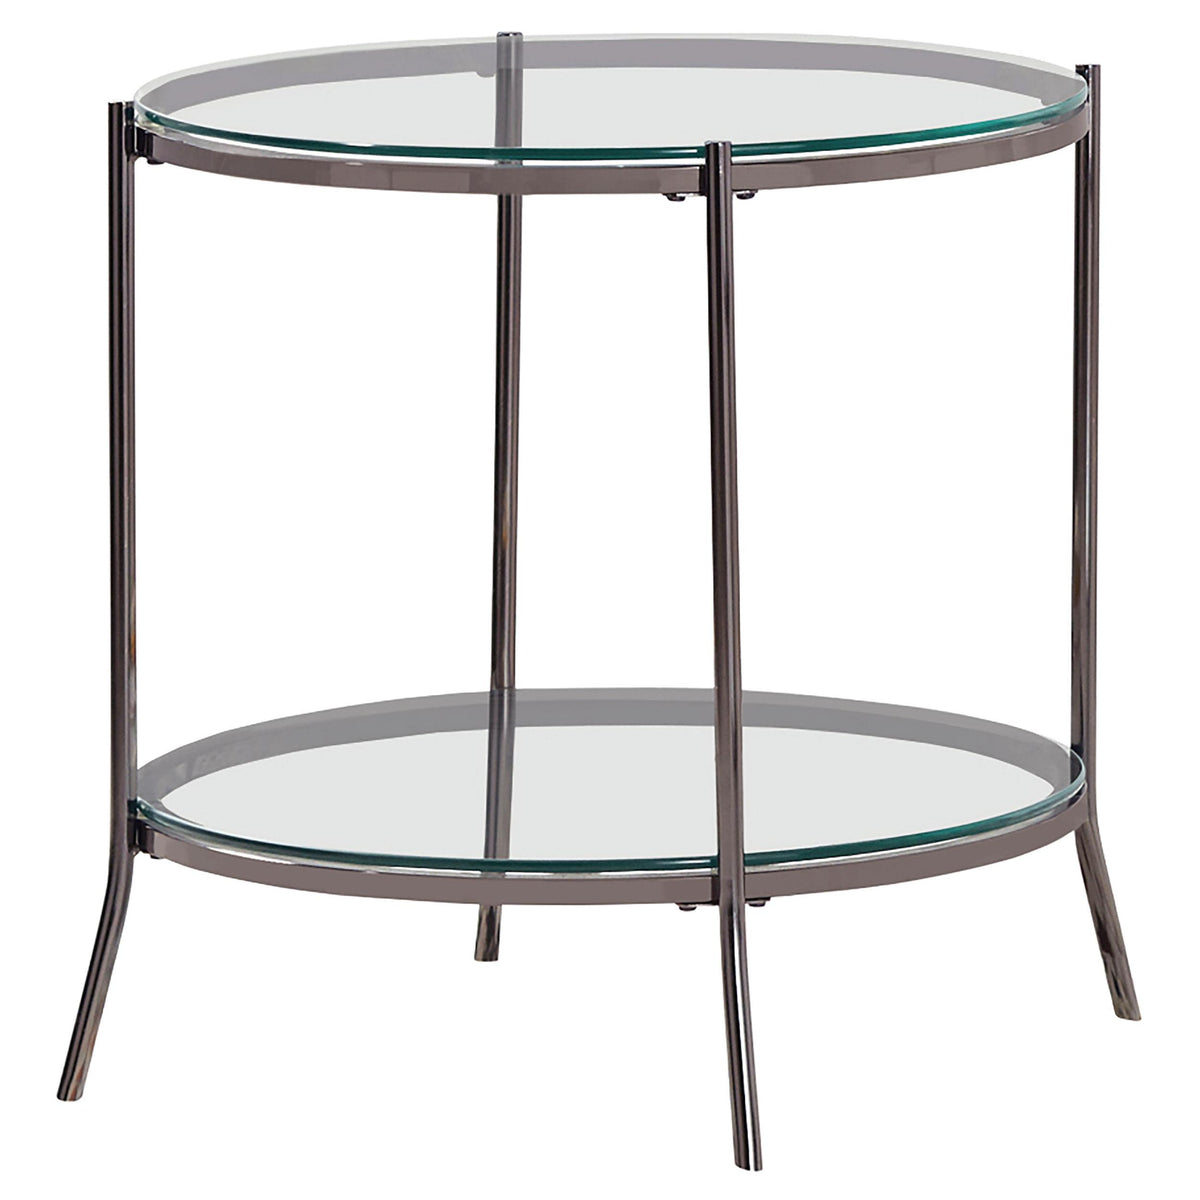 Laurie Round Glass Top End Table Black Nickel and Clear Laurie Round Glass Top End Table Black Nickel and Clear Half Price Furniture